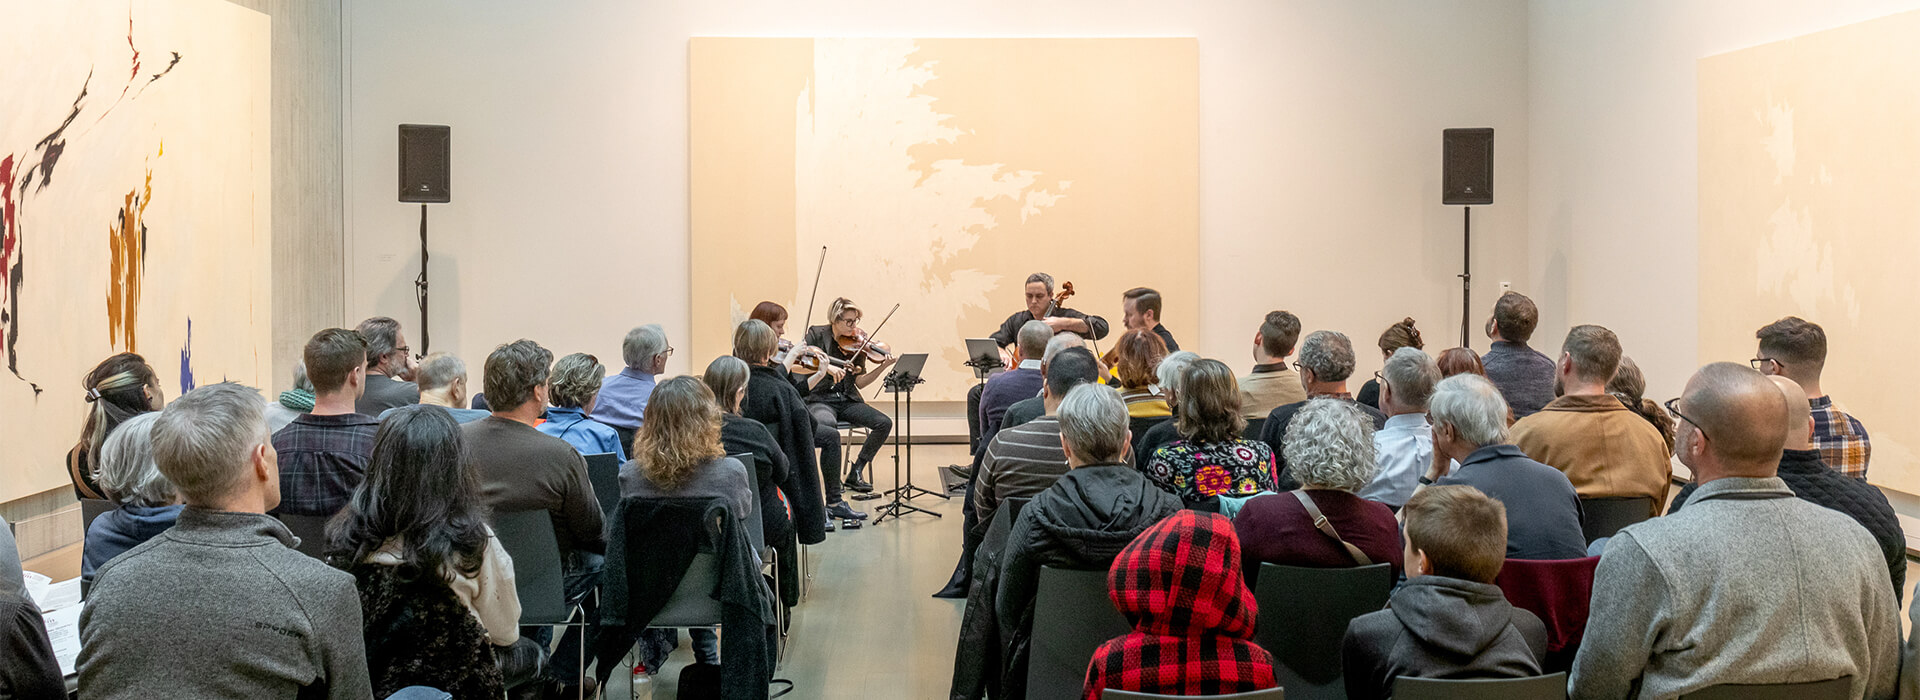 People seated in an art gallery watch a string quartet perform